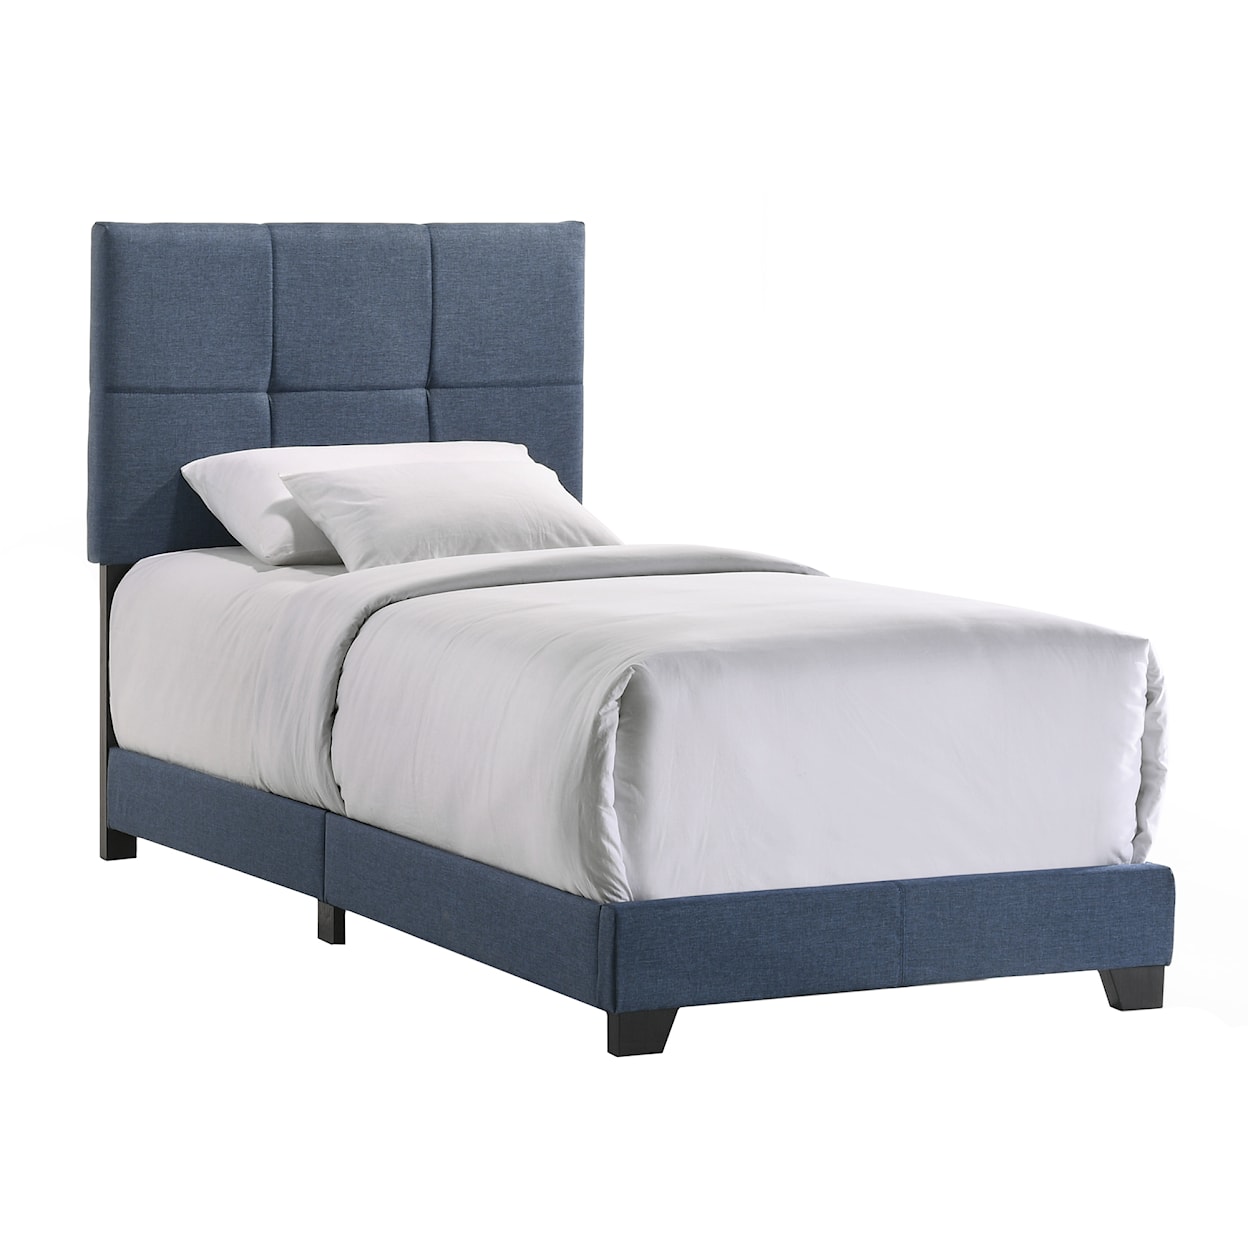 Intercon Upholstered Beds Devlin Twin Upholstered Bed